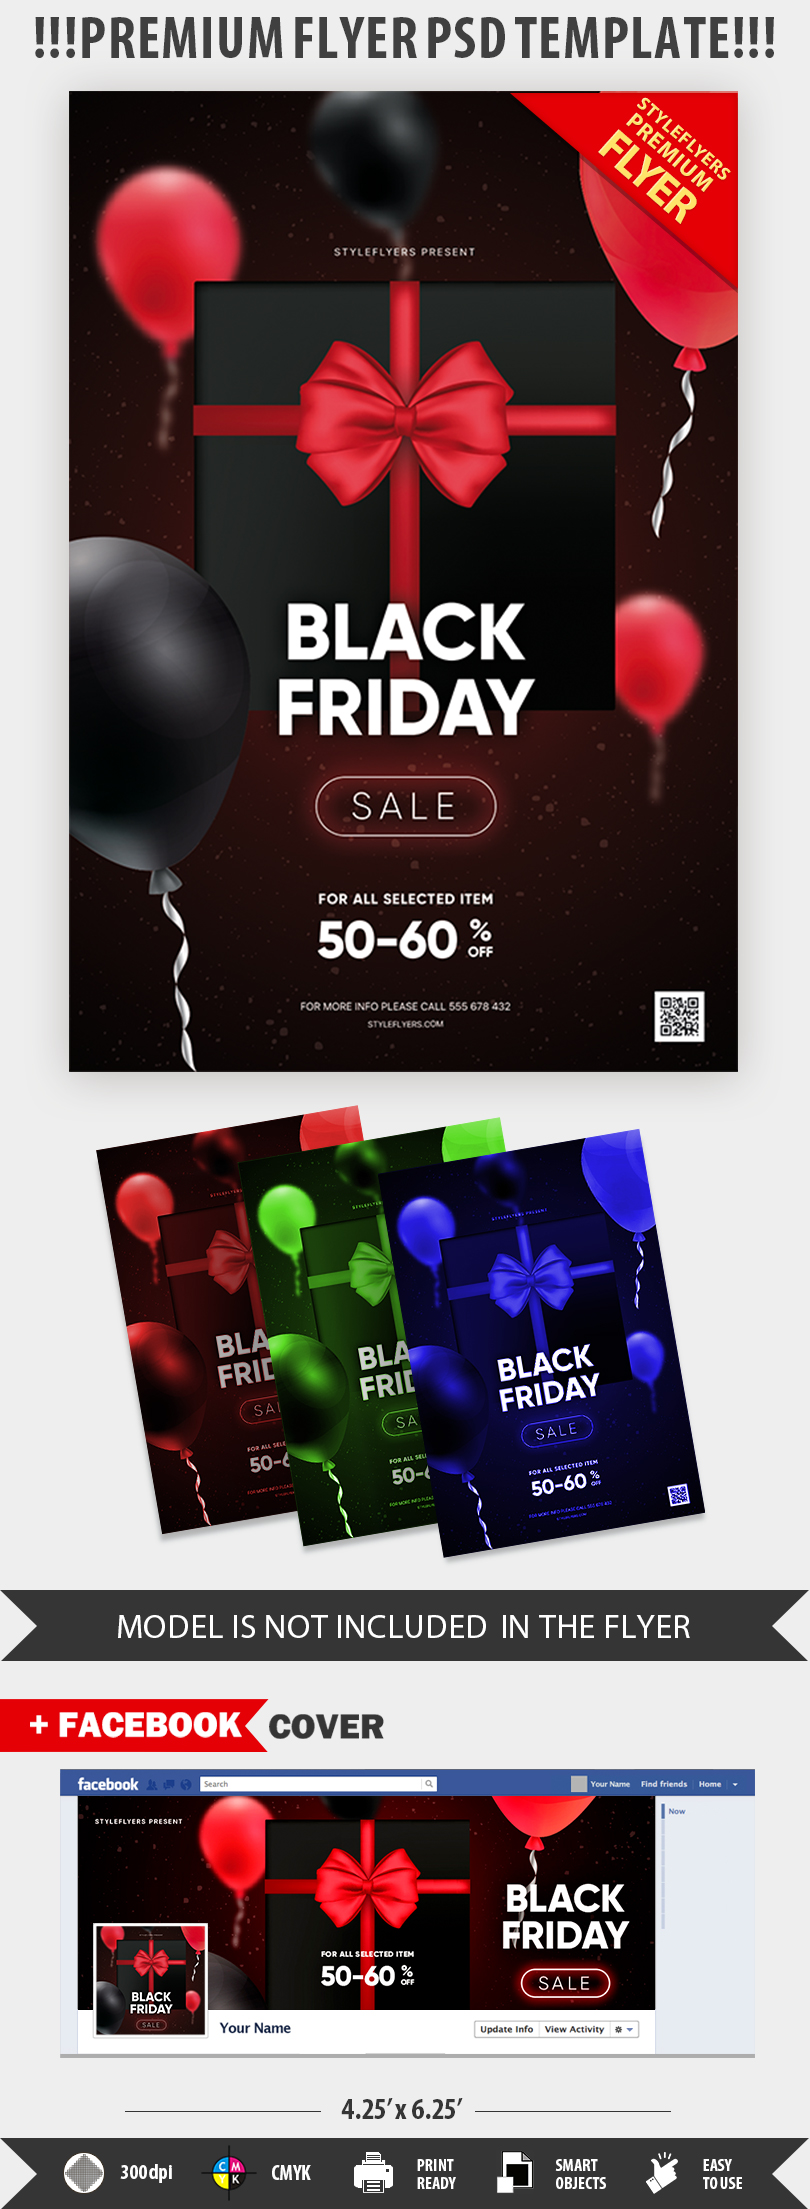 Black Friday PSD Flyer Template #30395 - Styleflyers - What Should I Buy For My Wedding On Black Friday